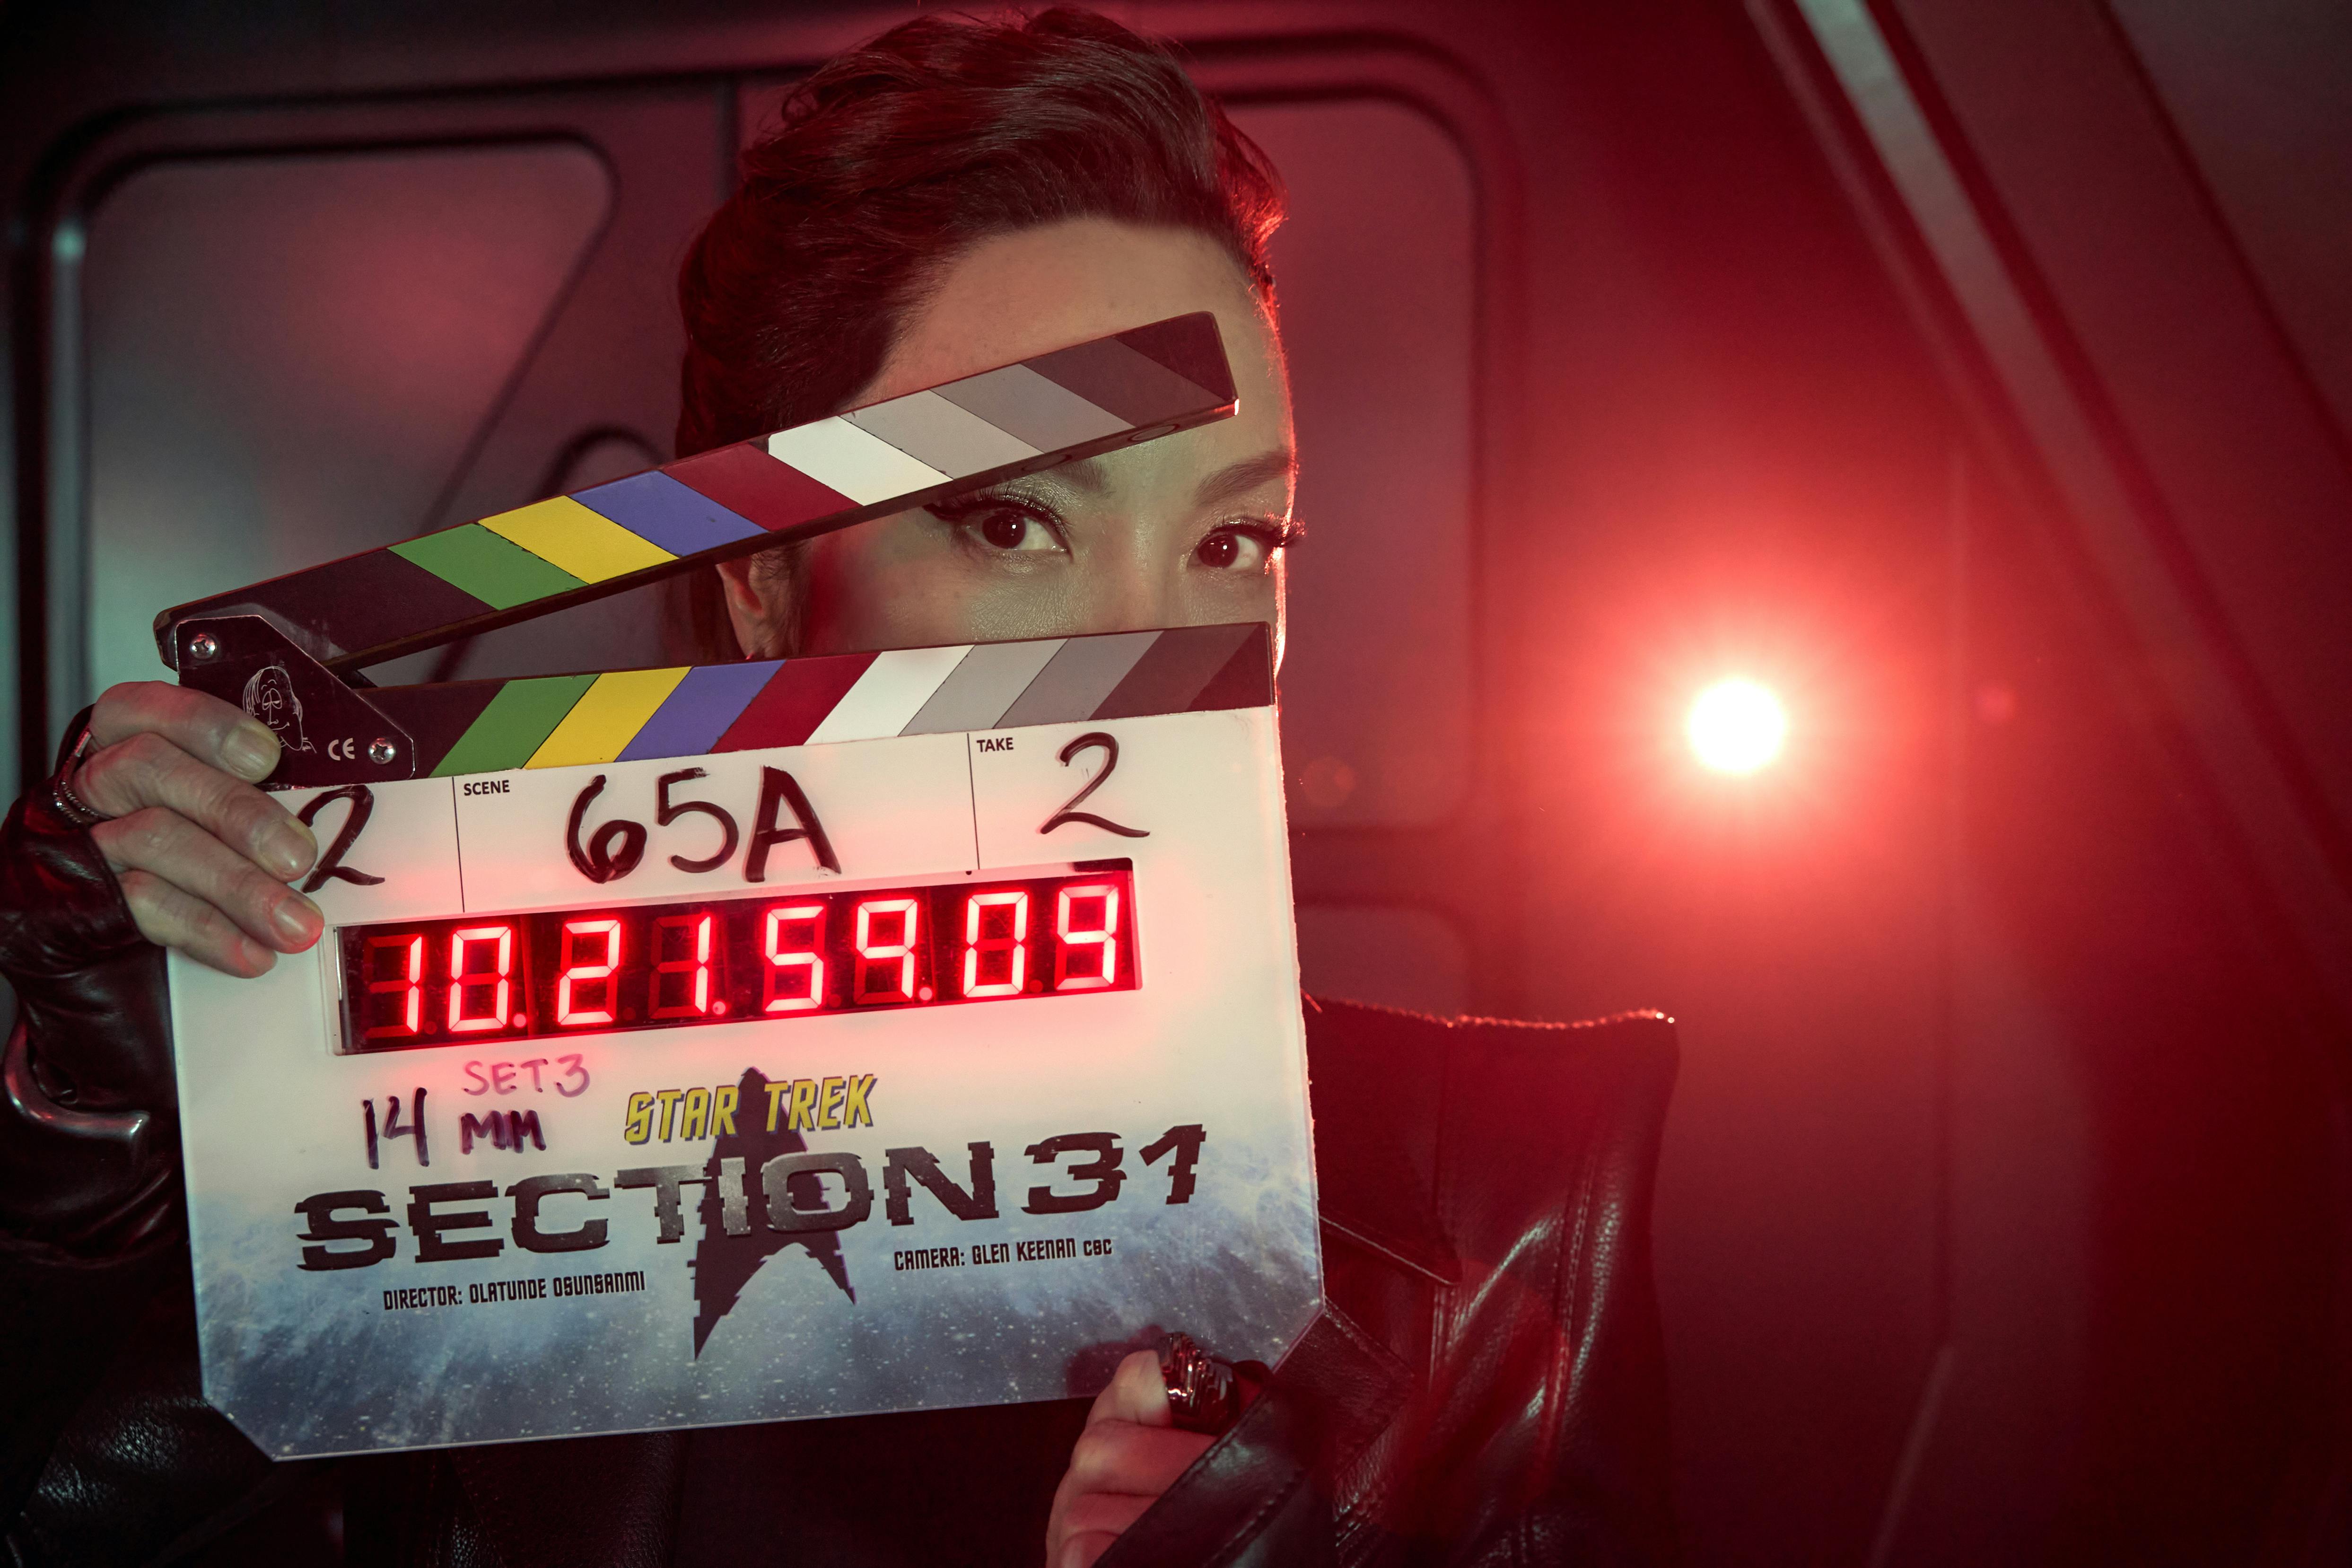 Michelle Yeoh in costume as Philip Georgiou holds a clapboard marking the production of Star Trek: Section 31